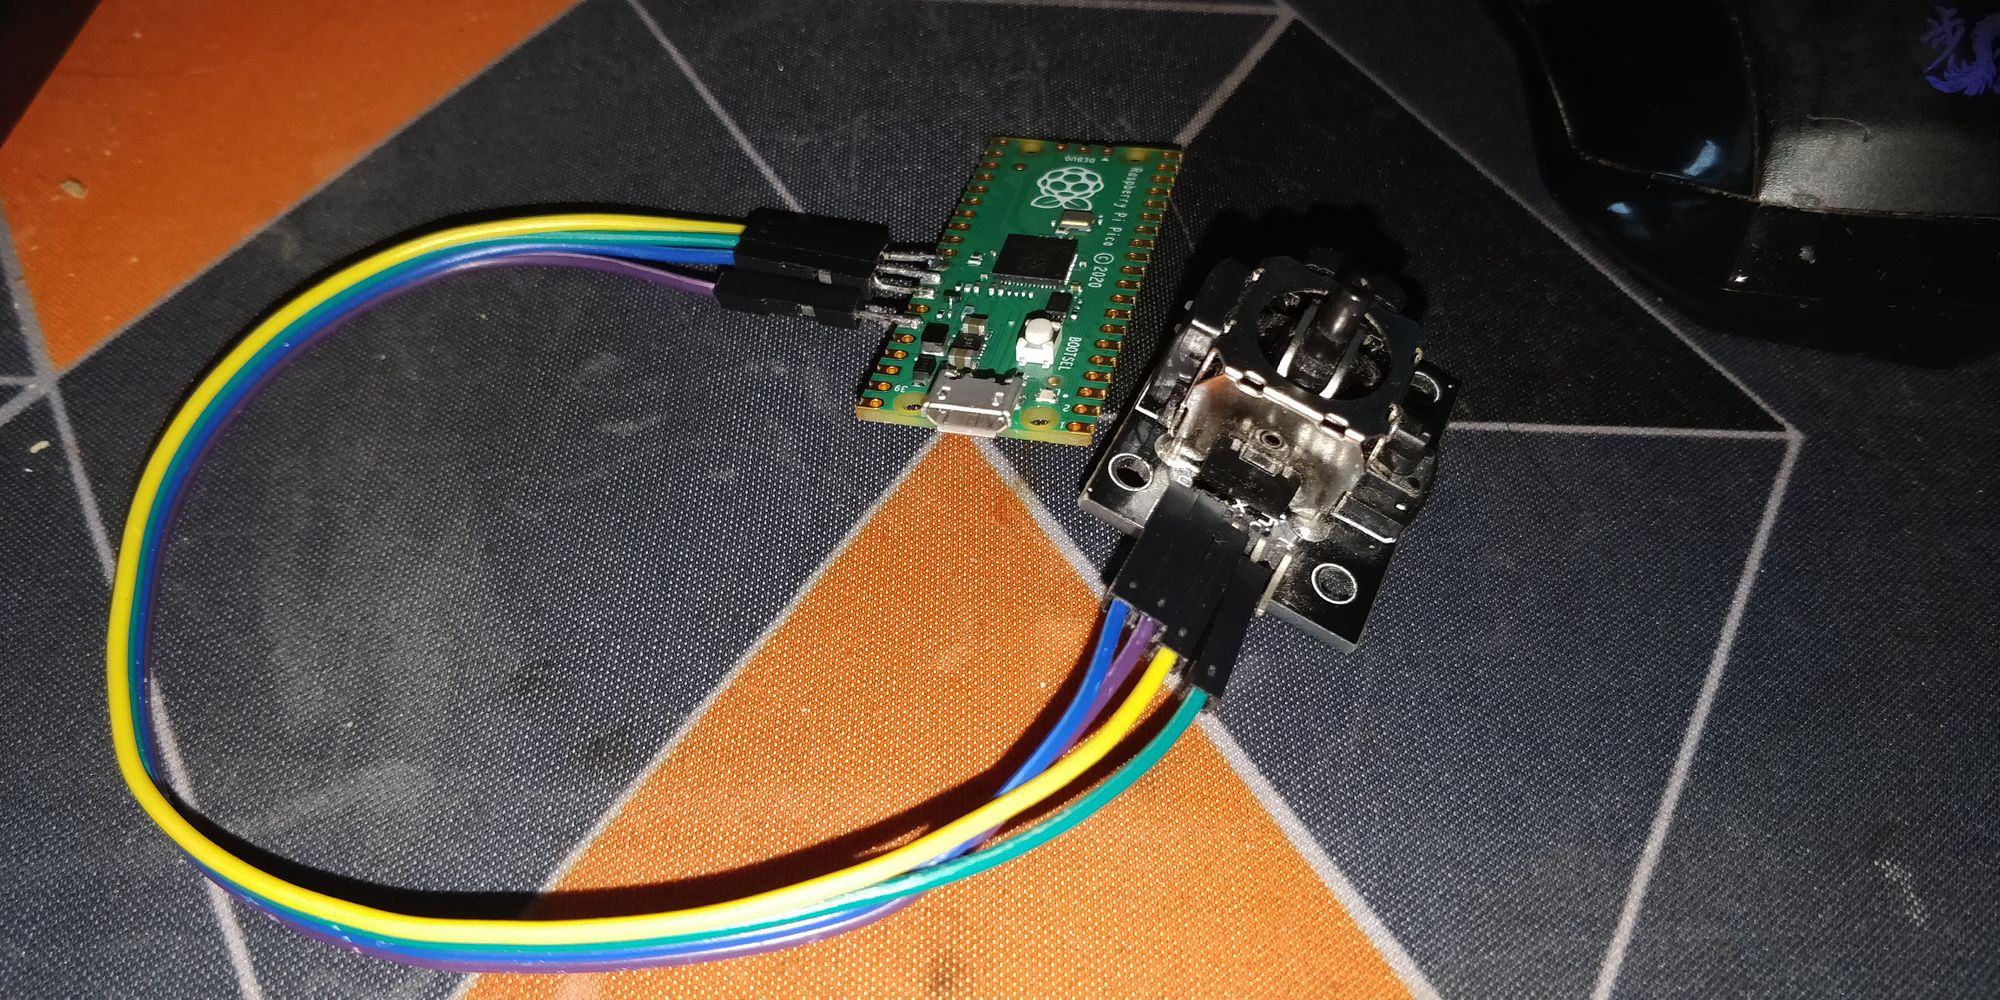 Getting started with HID and the Pi Pico